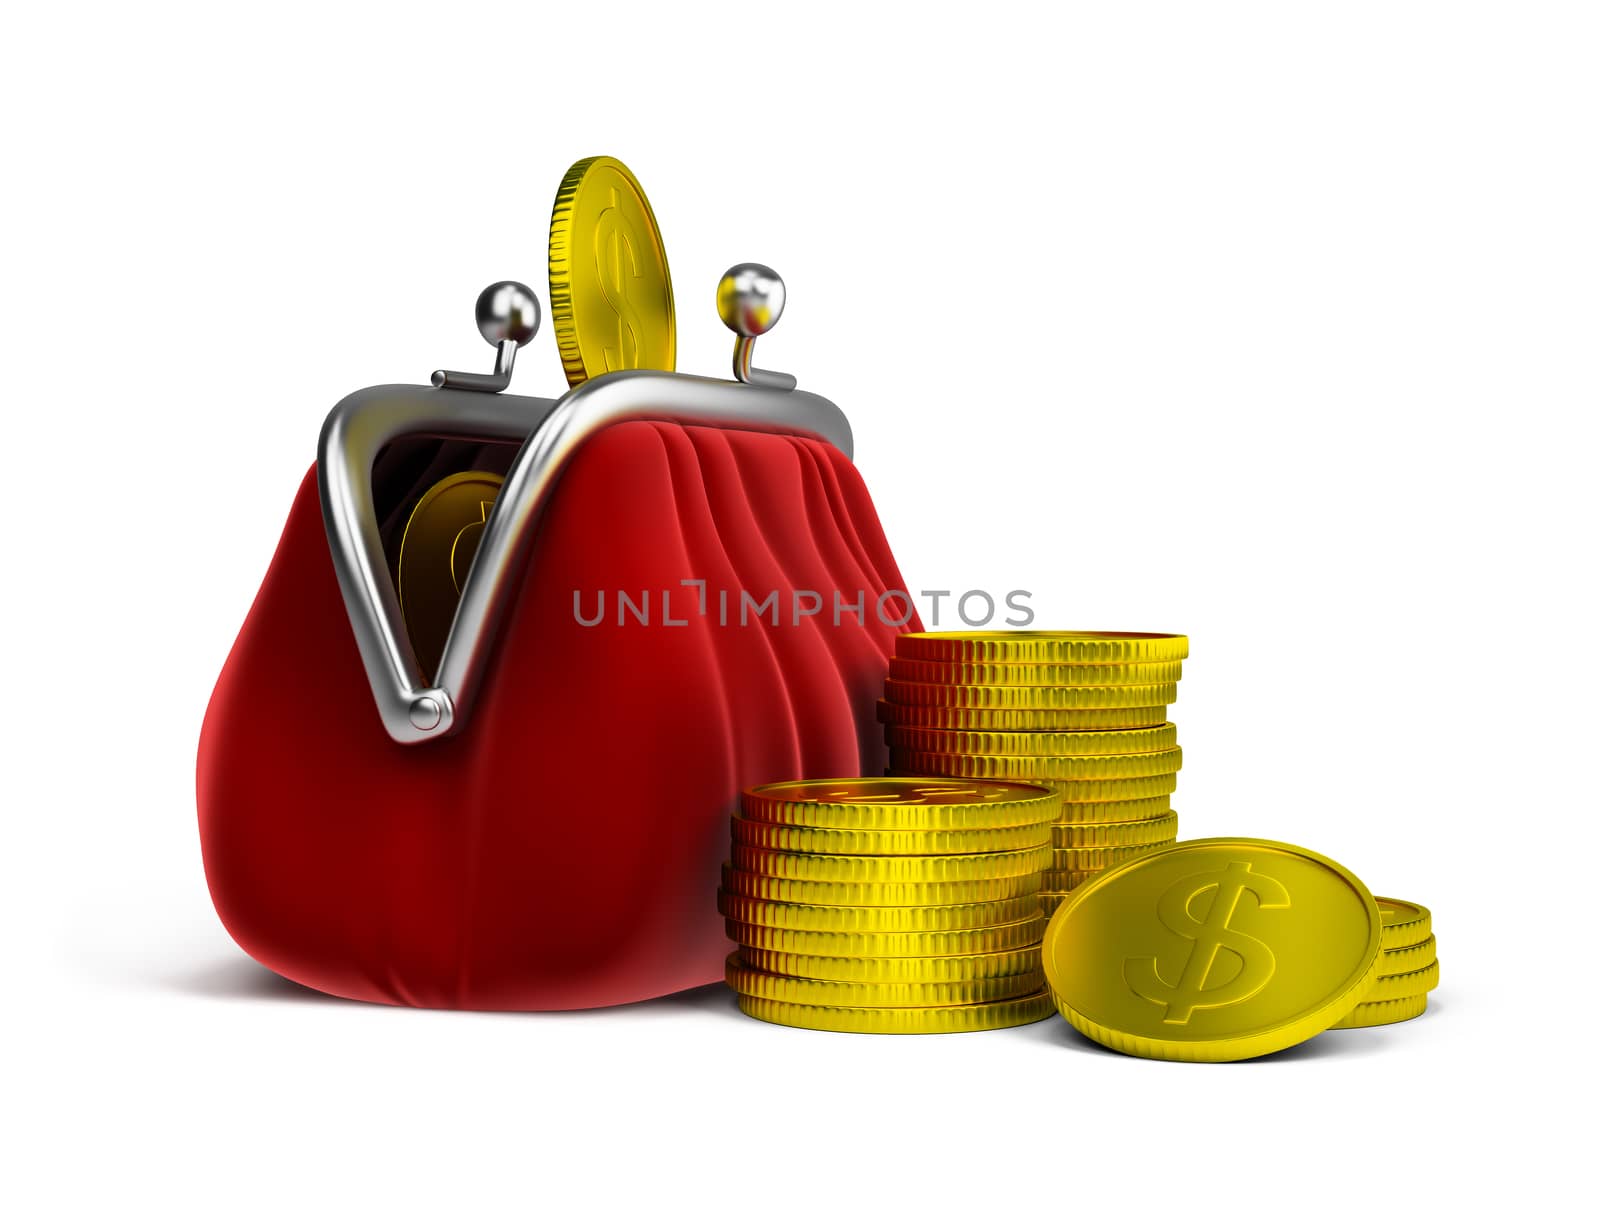 Red velvet purse and gold coins. 3d image. Isolated white background.